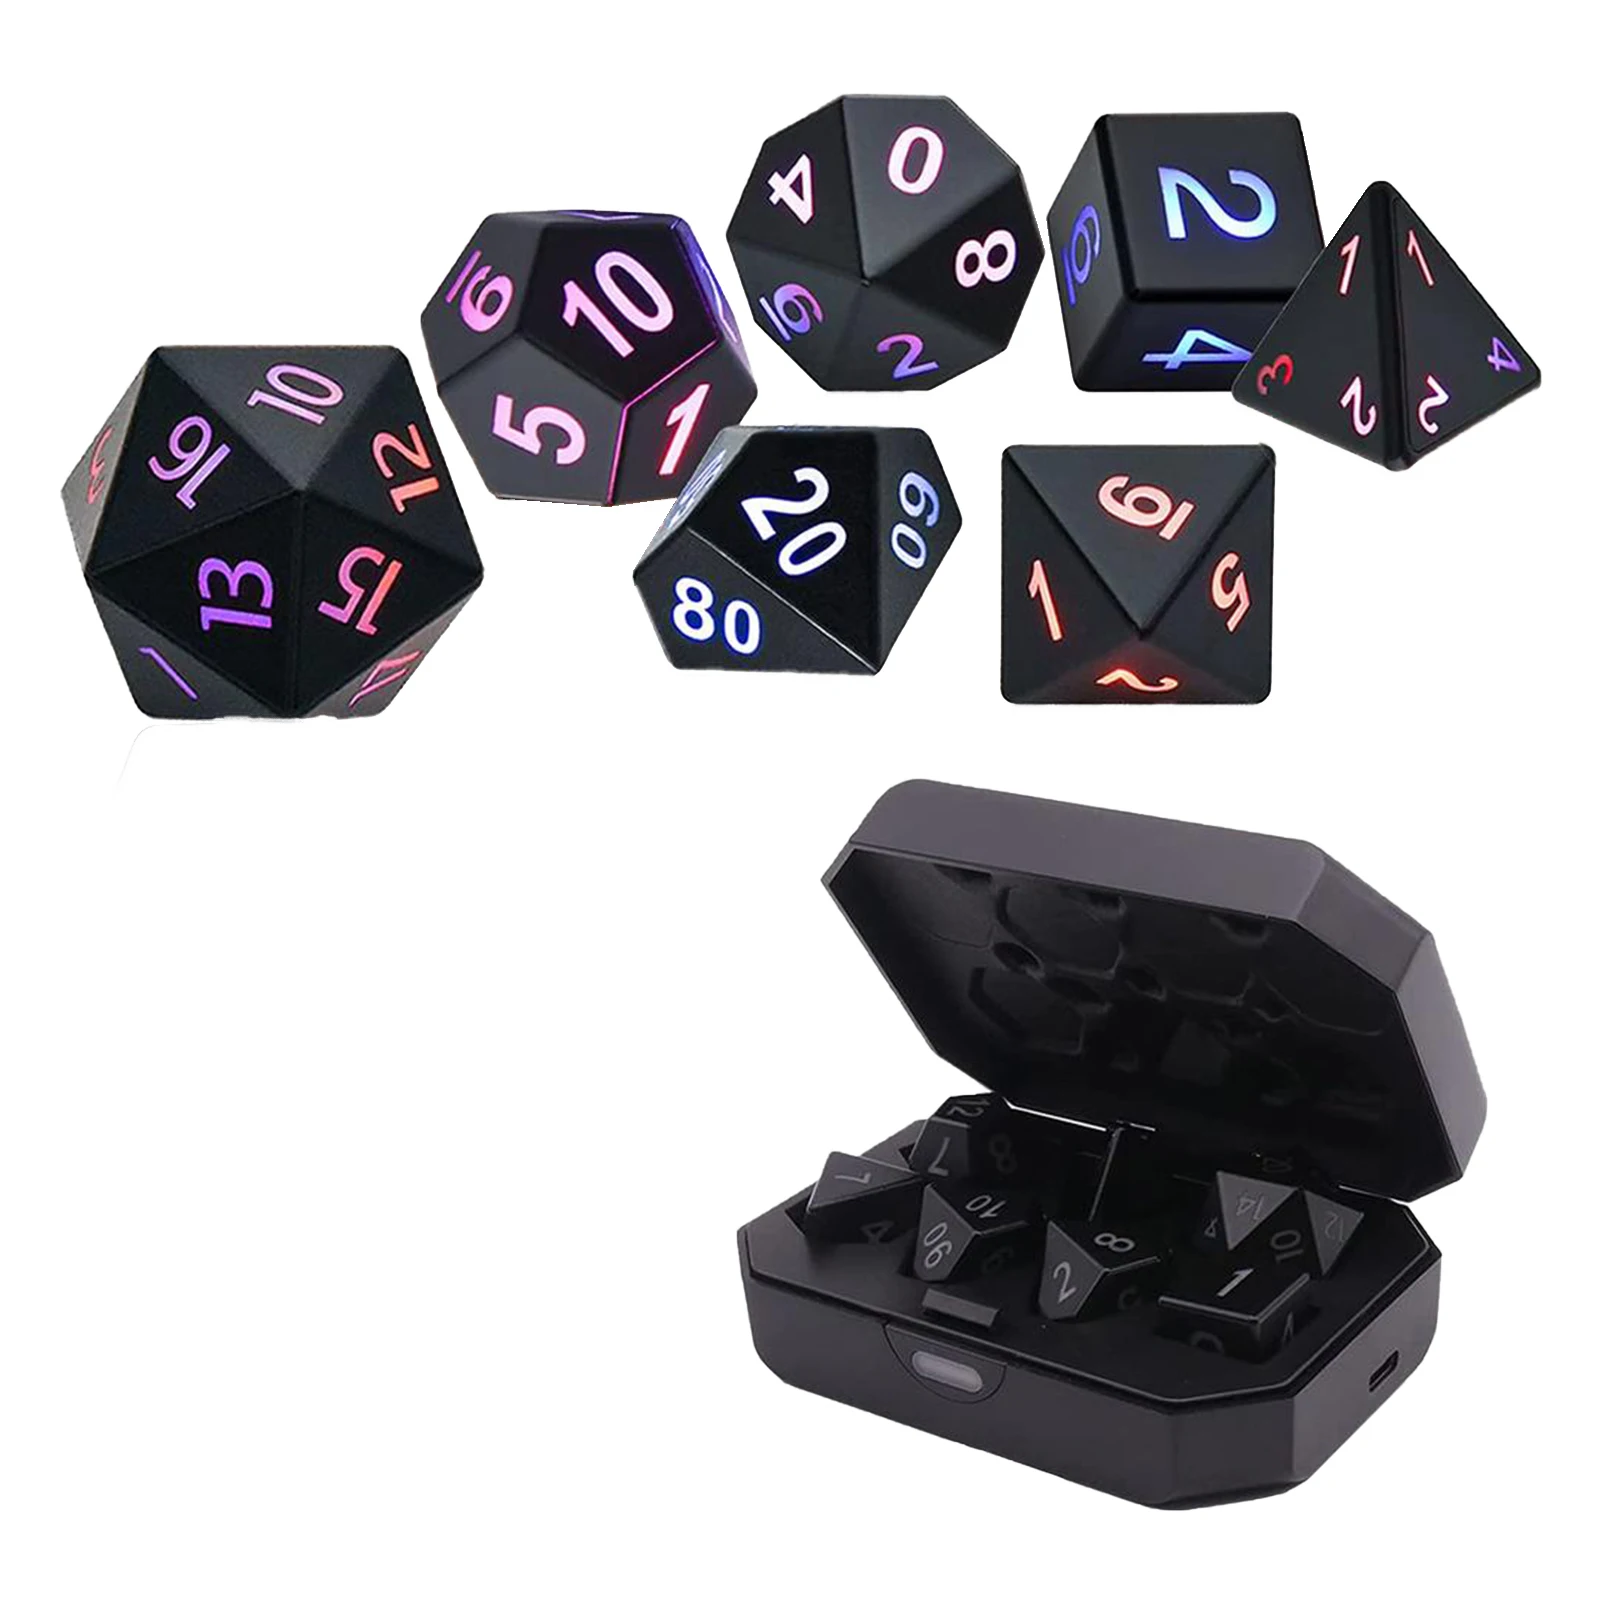 7pcs DND Dice Set Light Up DND Dice With Charging Box Glowing Dice For Tabletop Games ZHOORQI D&D Dice Role-Playing Game